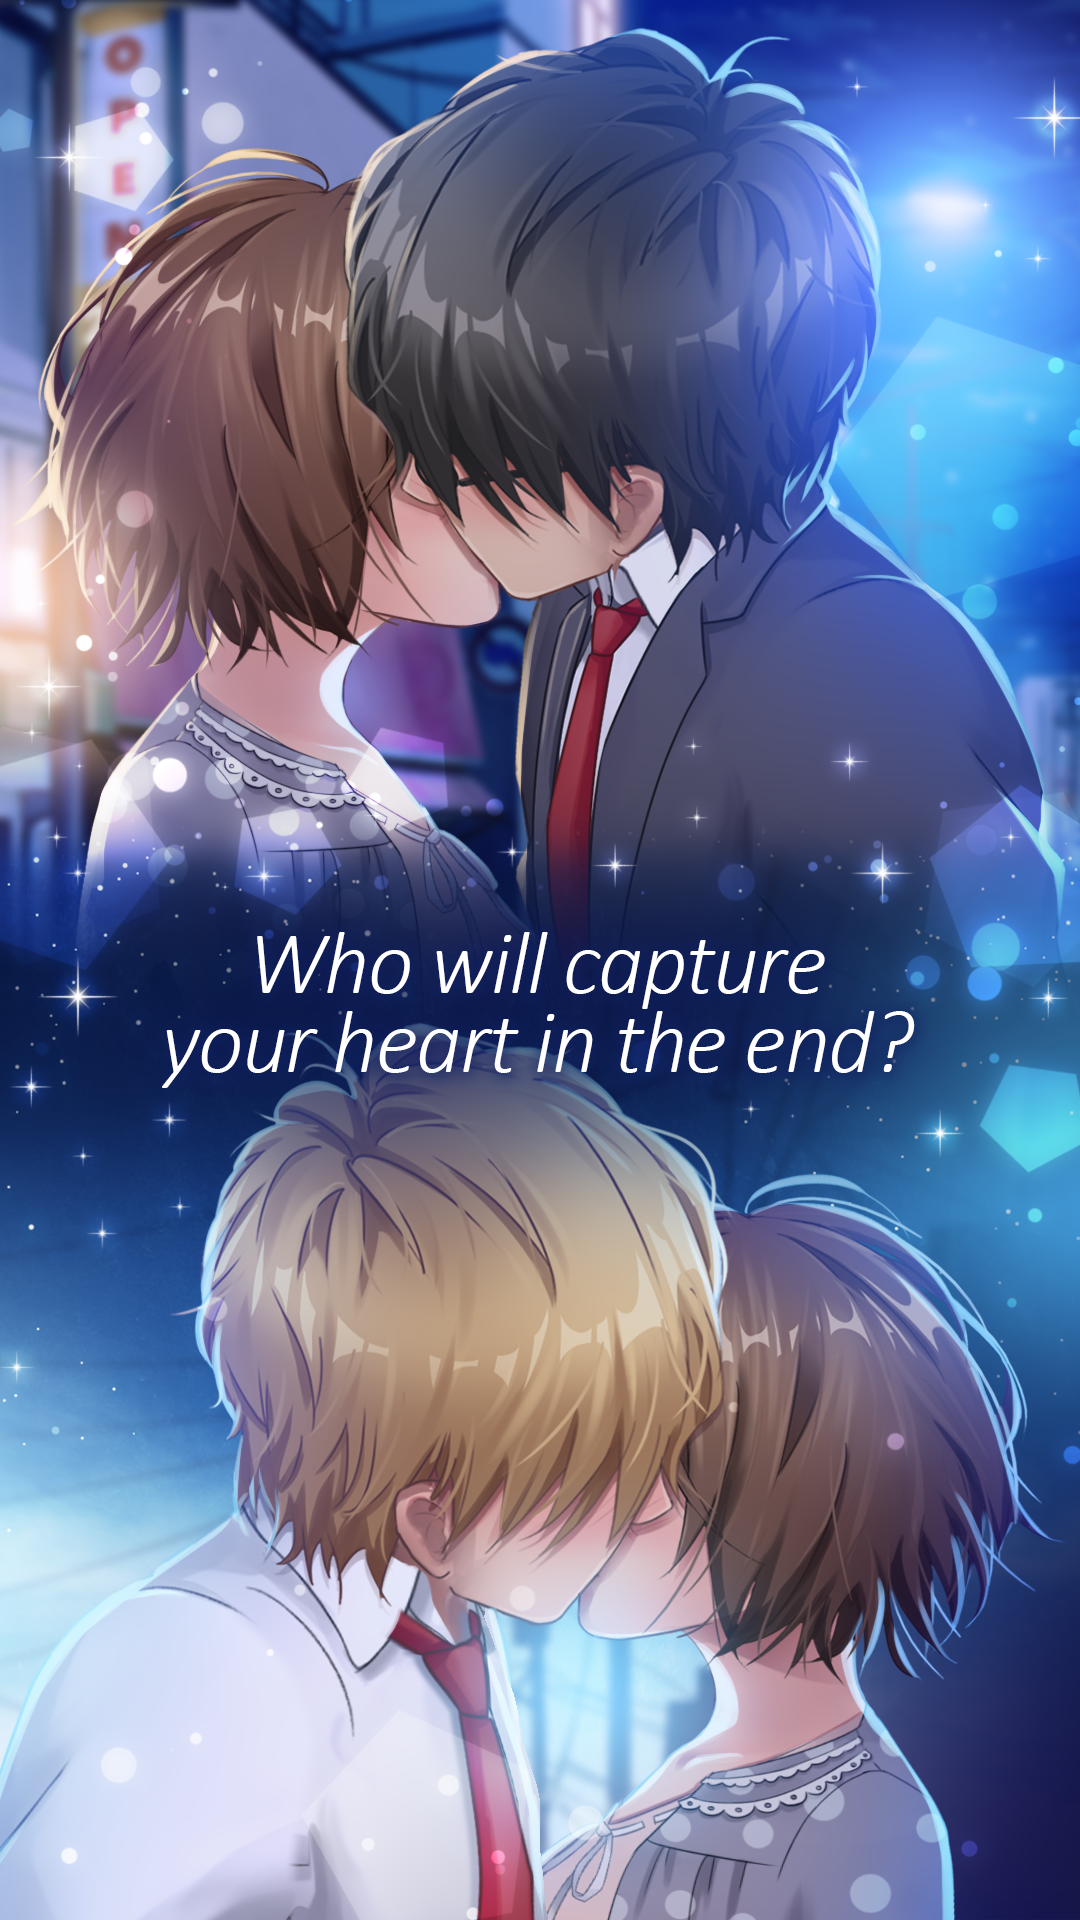 Anime Love Story Games: Shadowtime APK 20.1 Download for Android